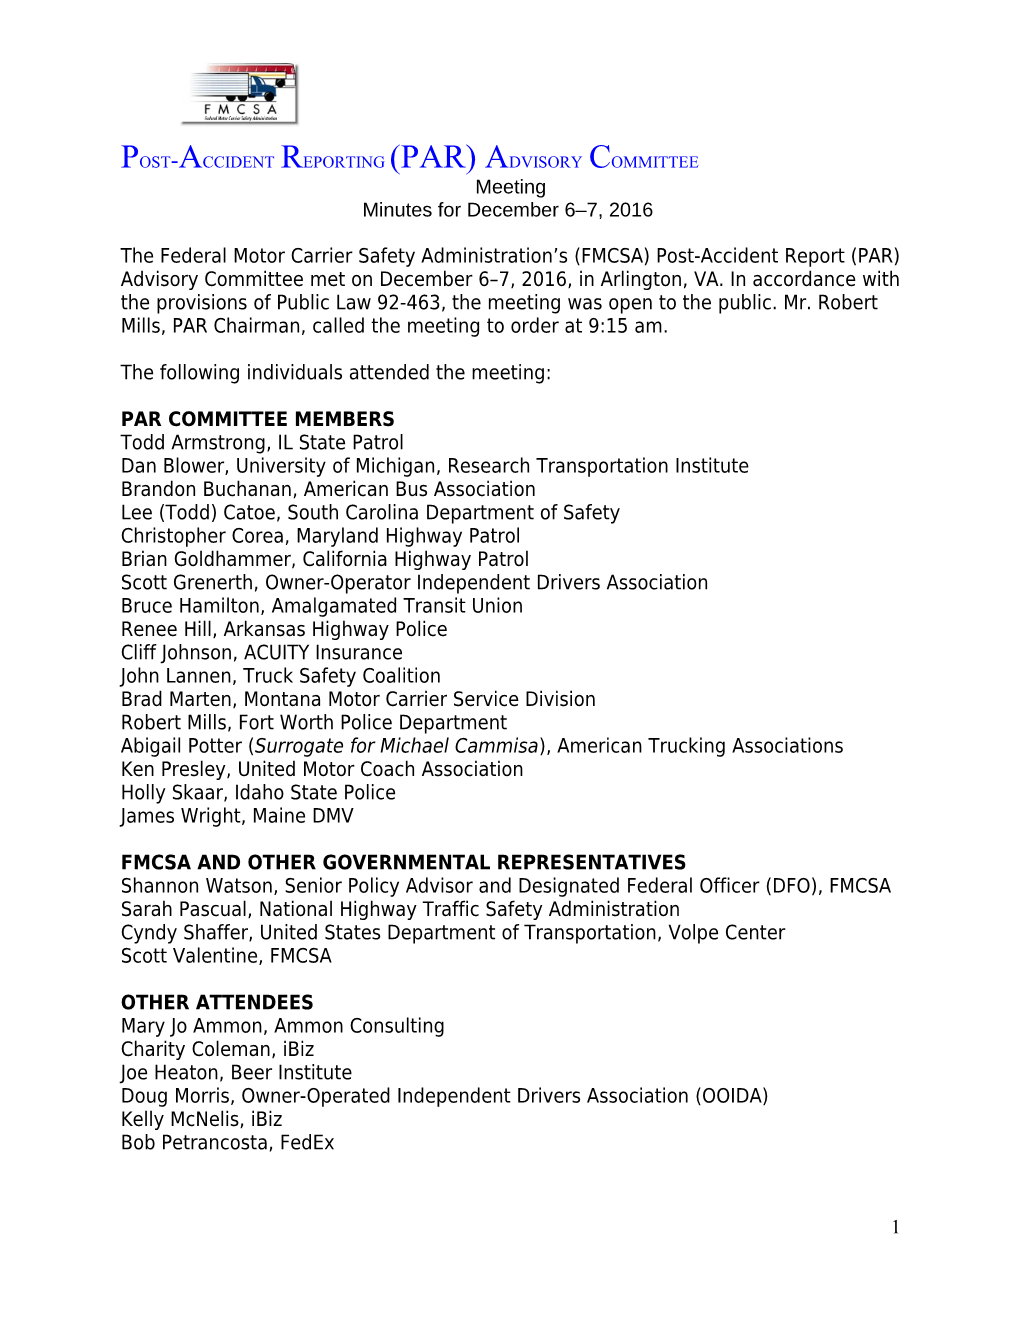 Post-Accident Reporting (Par) Advisory Committee